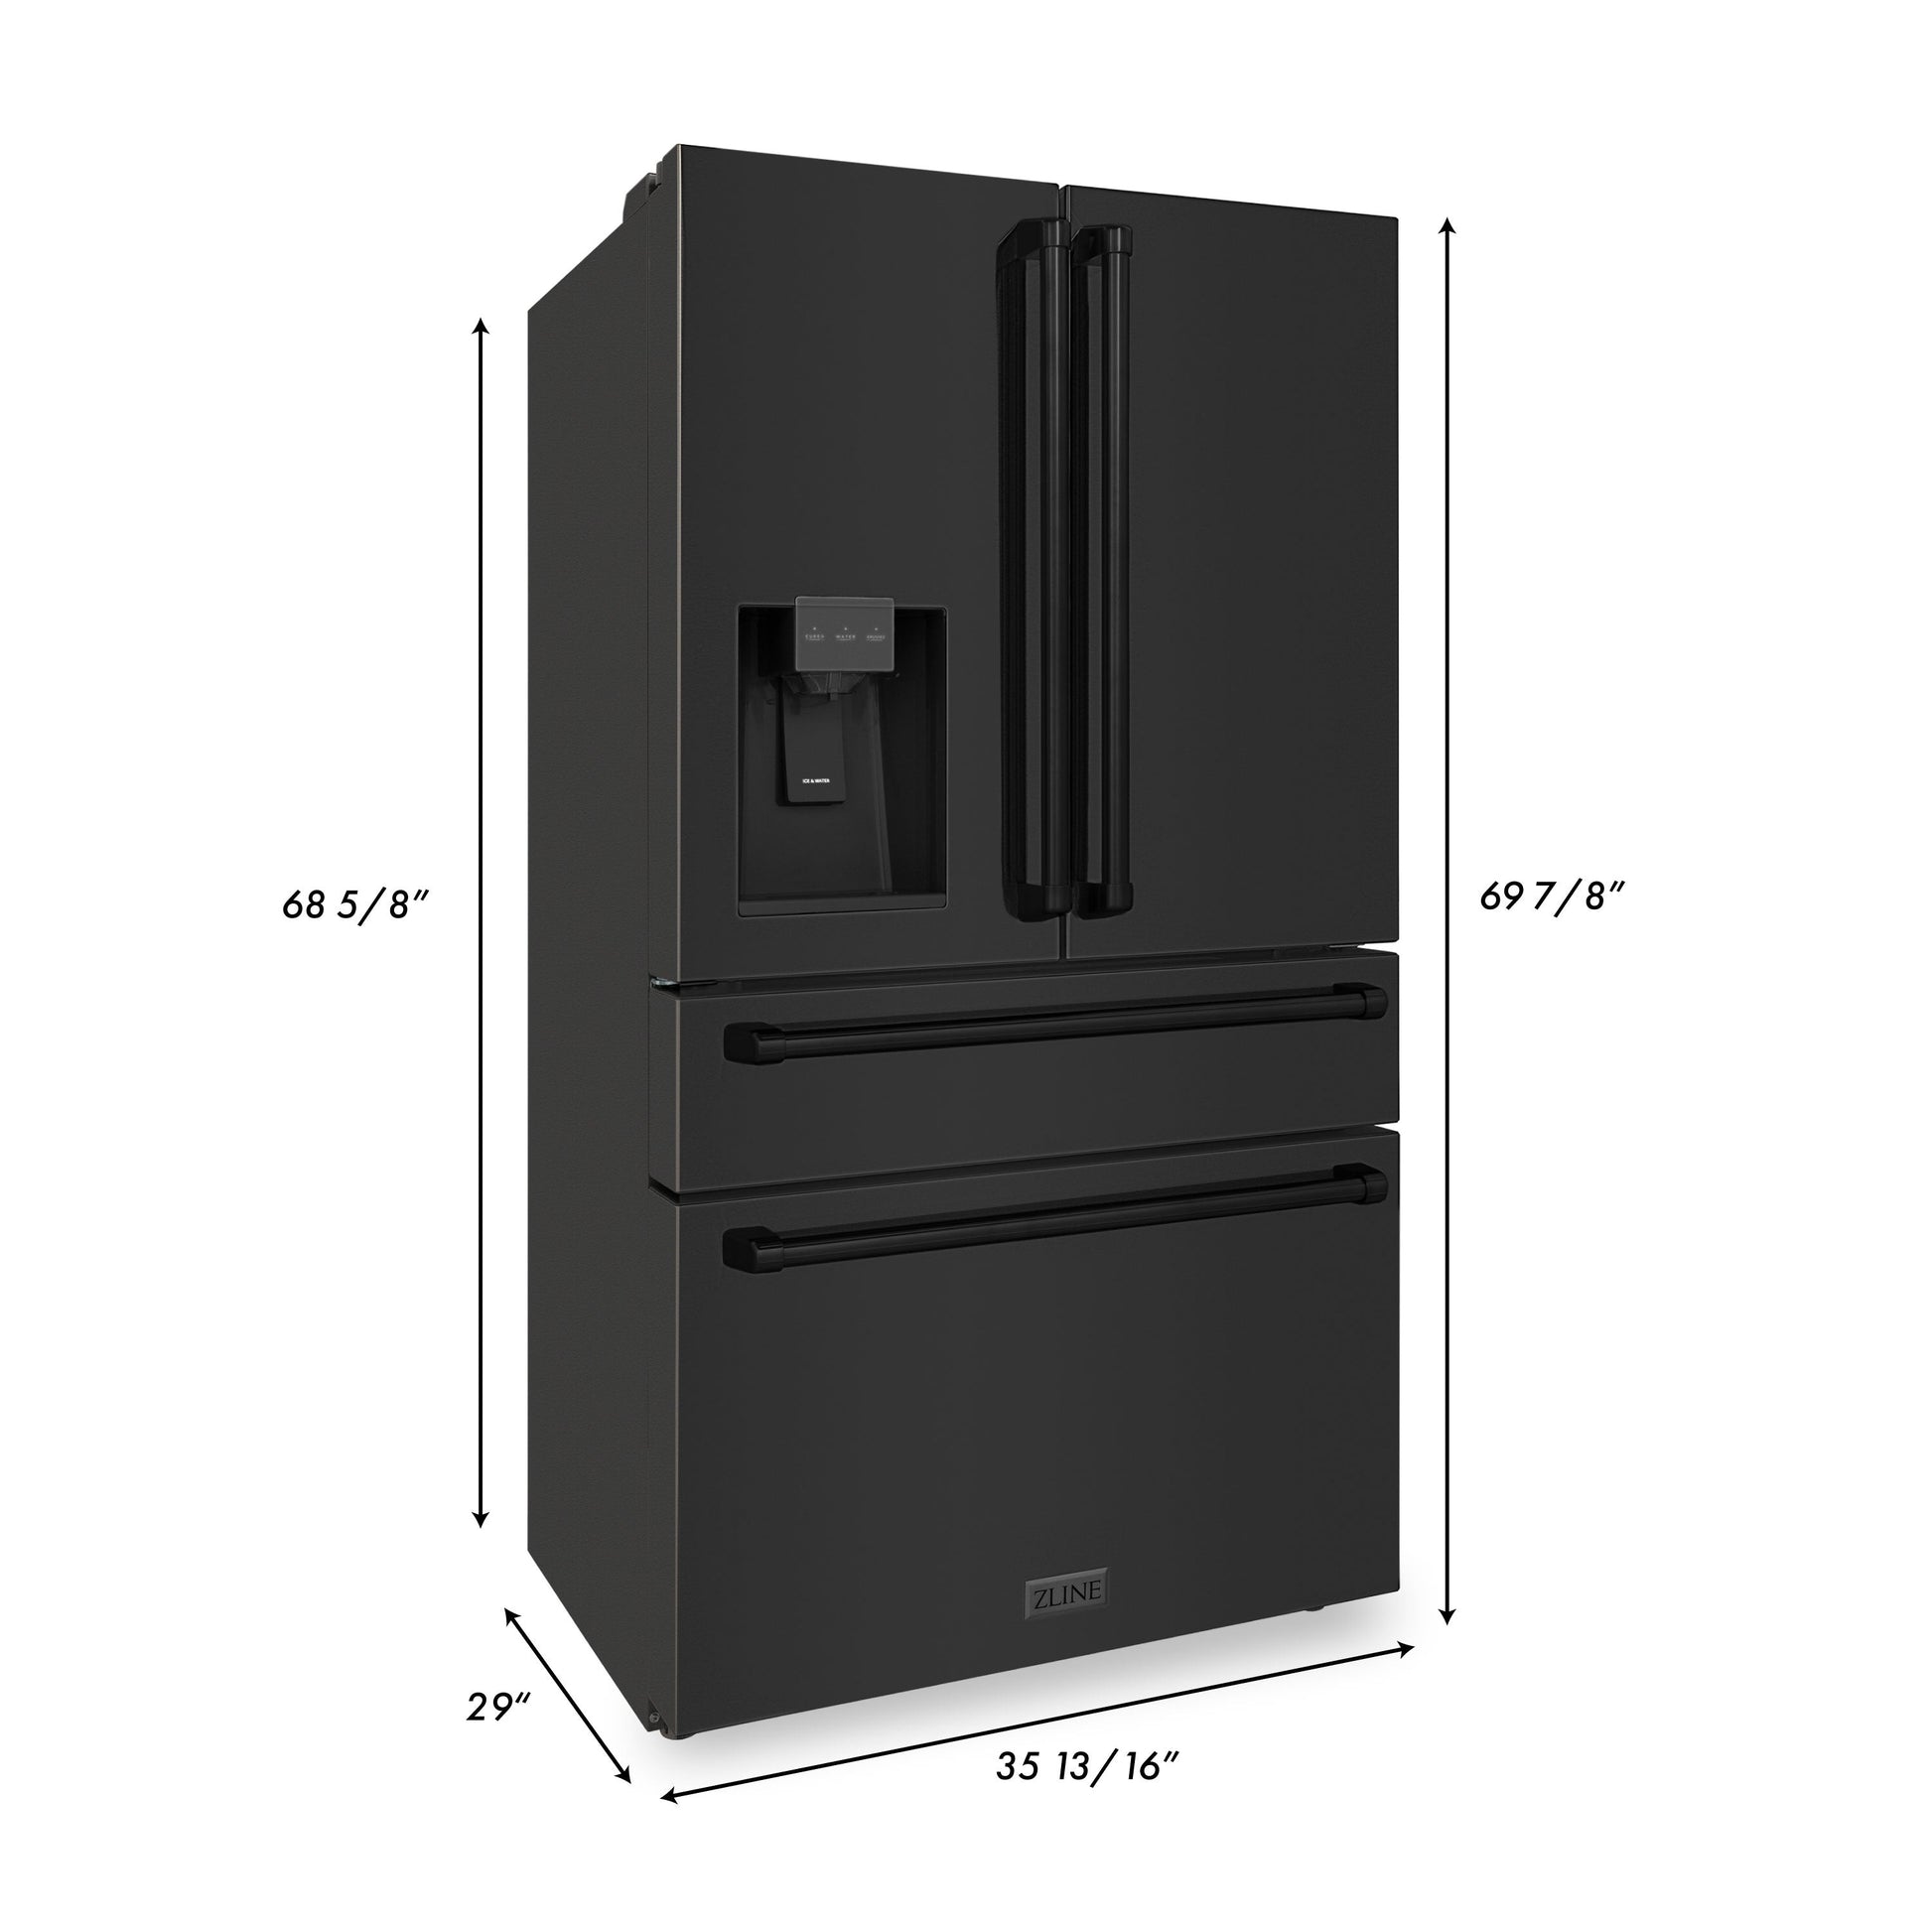 ZLINE 36" Freestanding French Door Refrigerator with External Water and Ice Dispenser - Fingerprint Resistant with Color Options